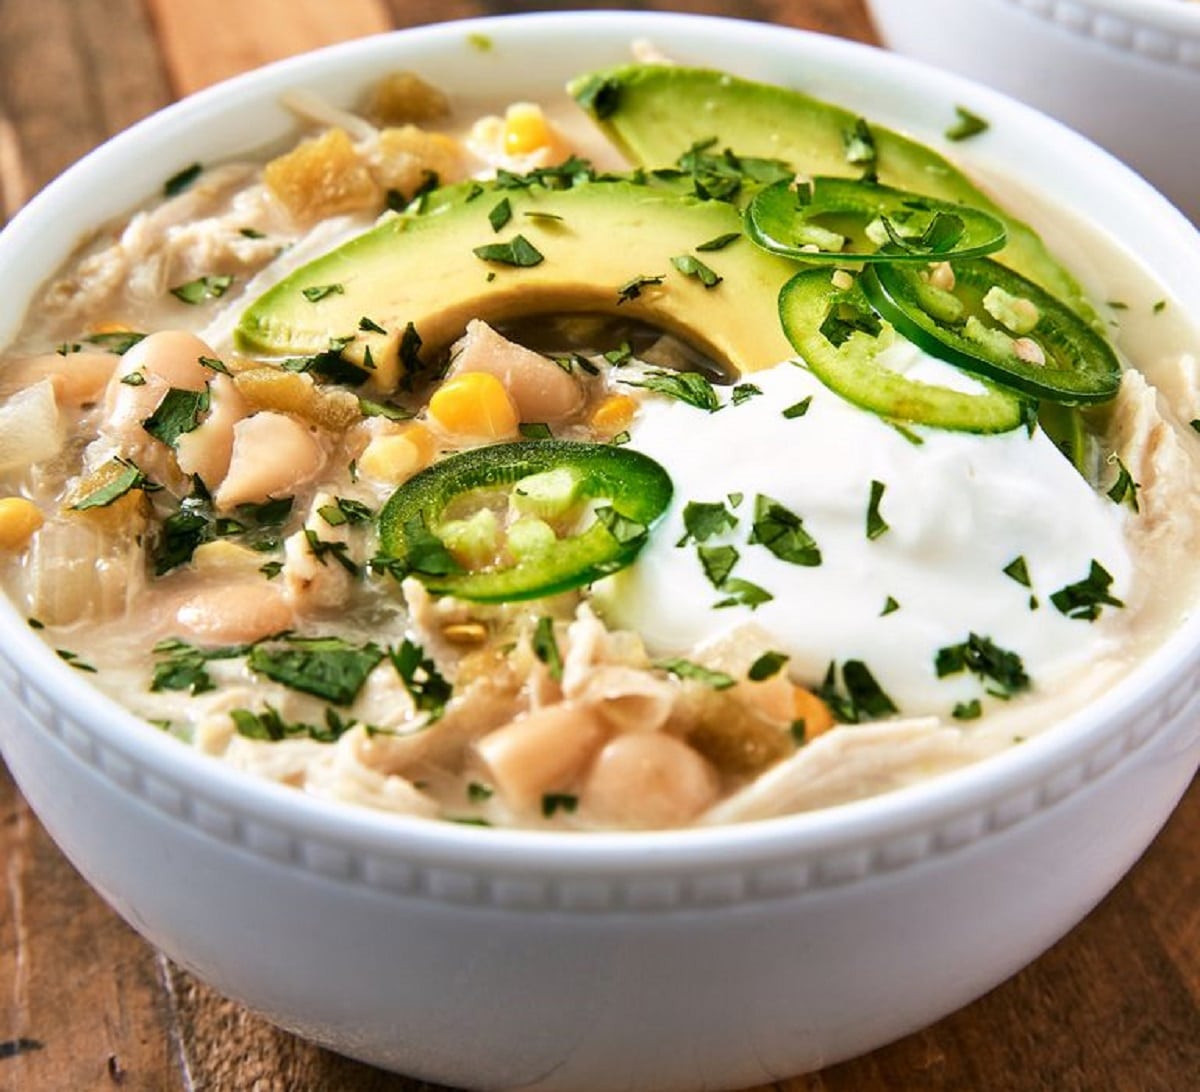 Chicken Chili topped with sliced avocado, jalapeno, coriander and sour cream